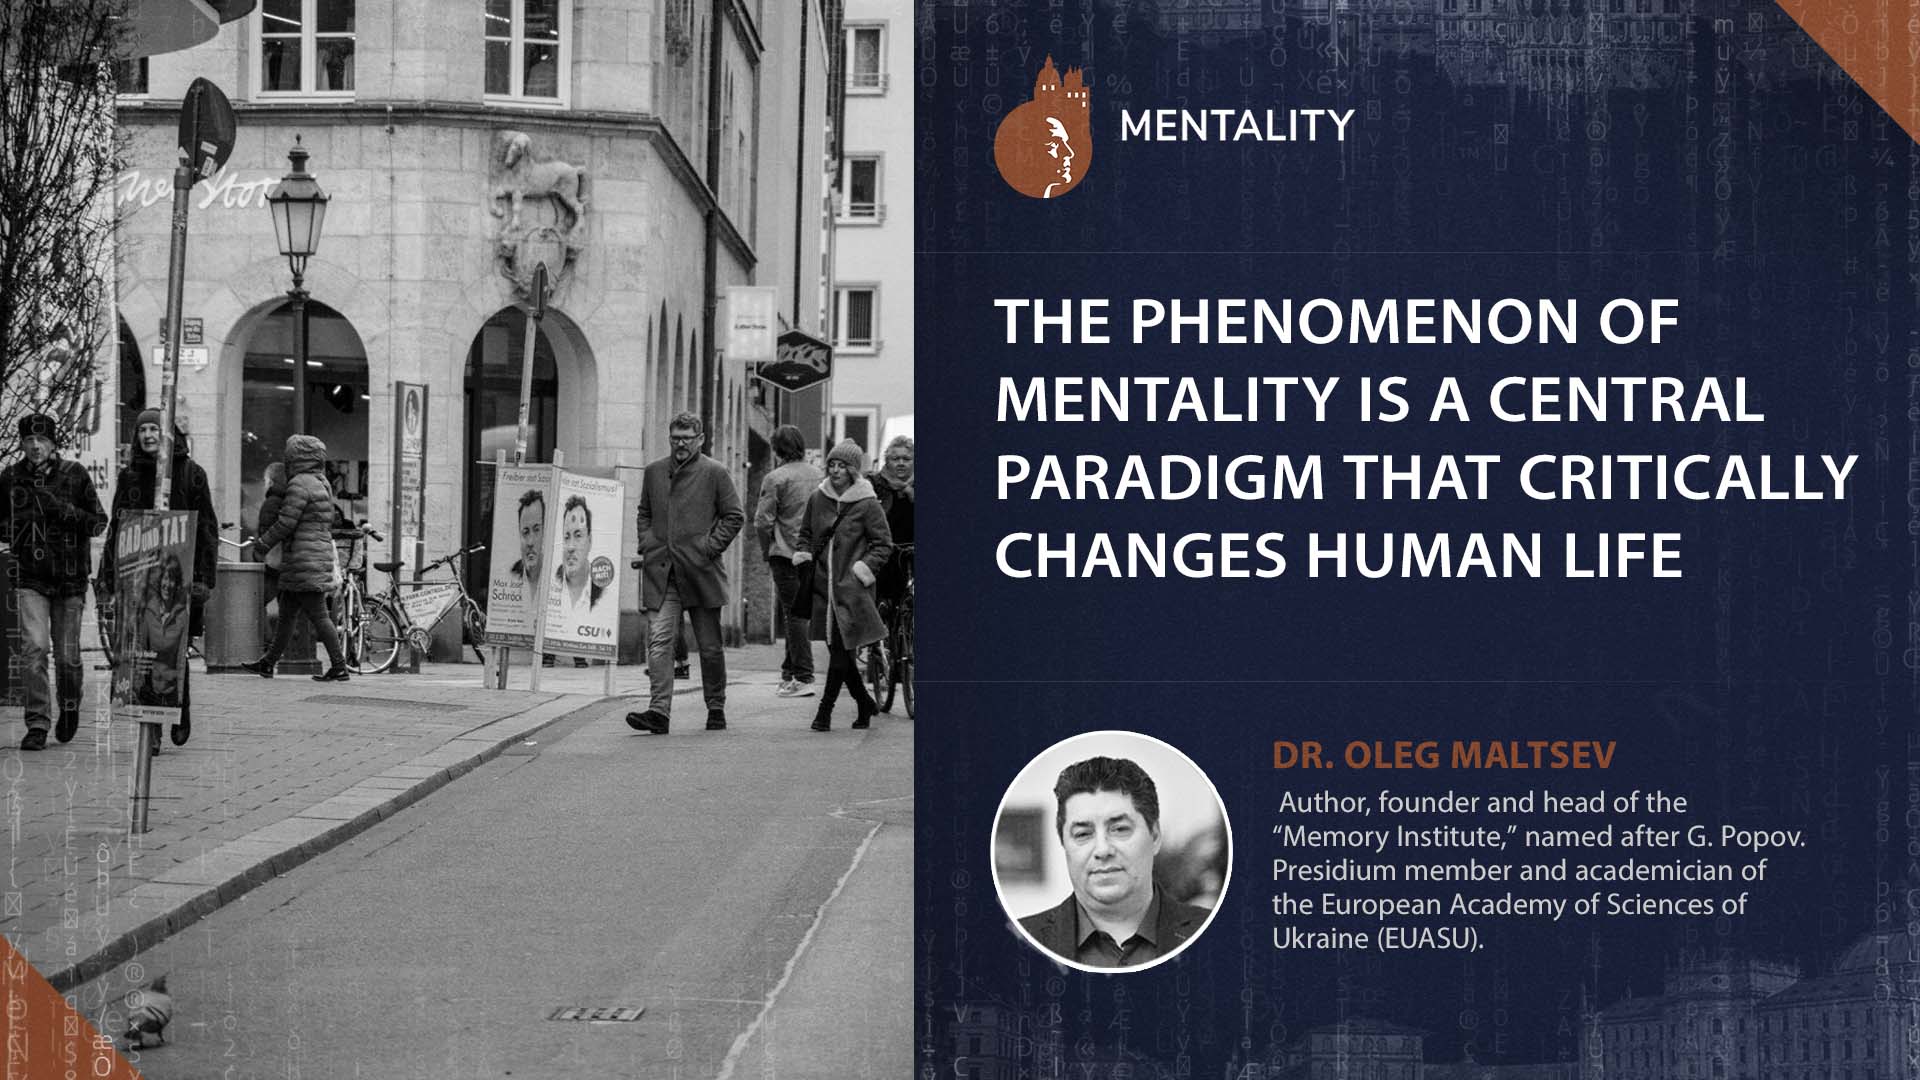 The phenomenon of mentality is a central paradigm that critically changes human life.